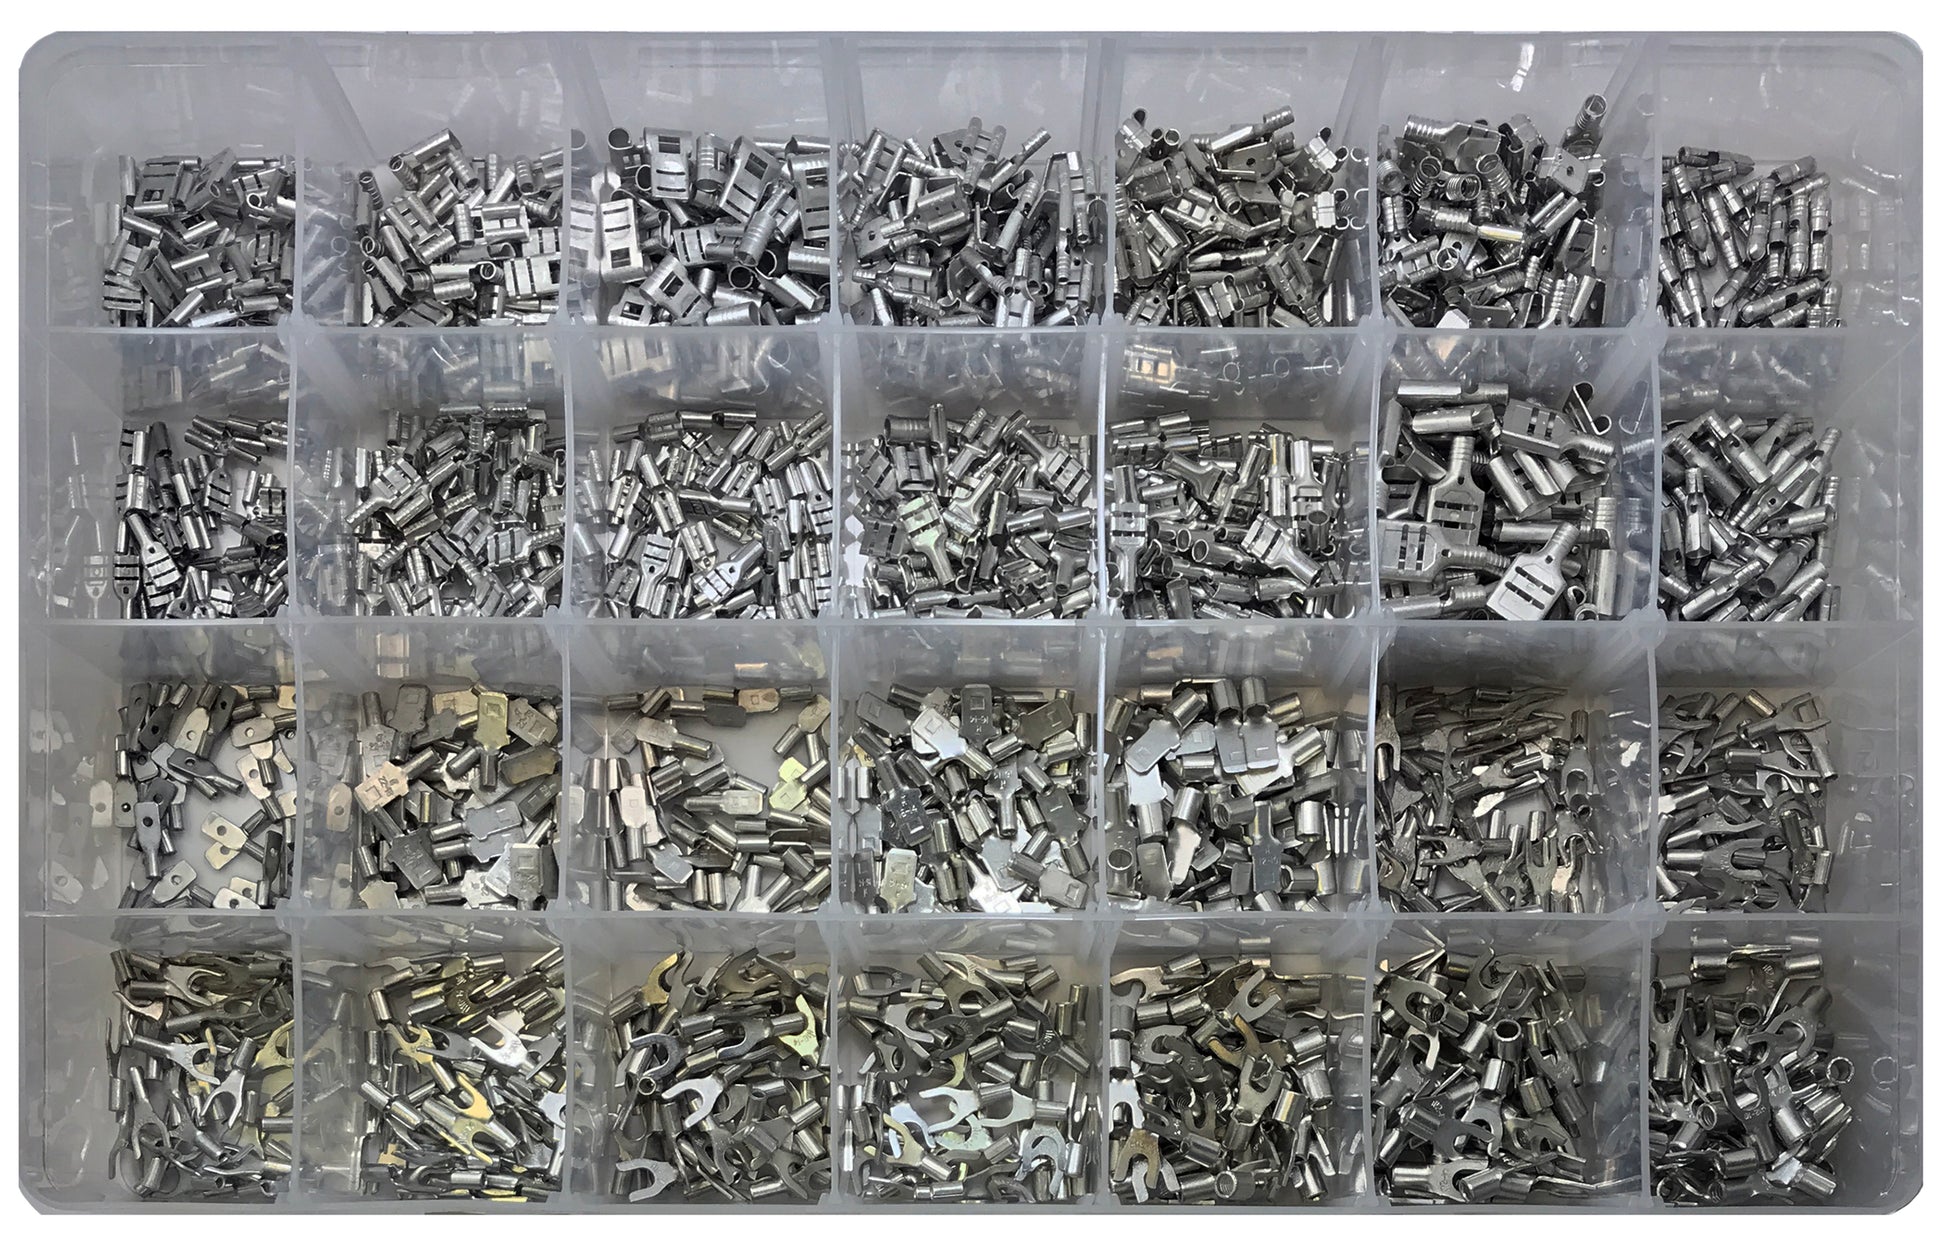 Master Non-Insulated Wire Terminal Connector Assortment Kit - 2600 Pieces